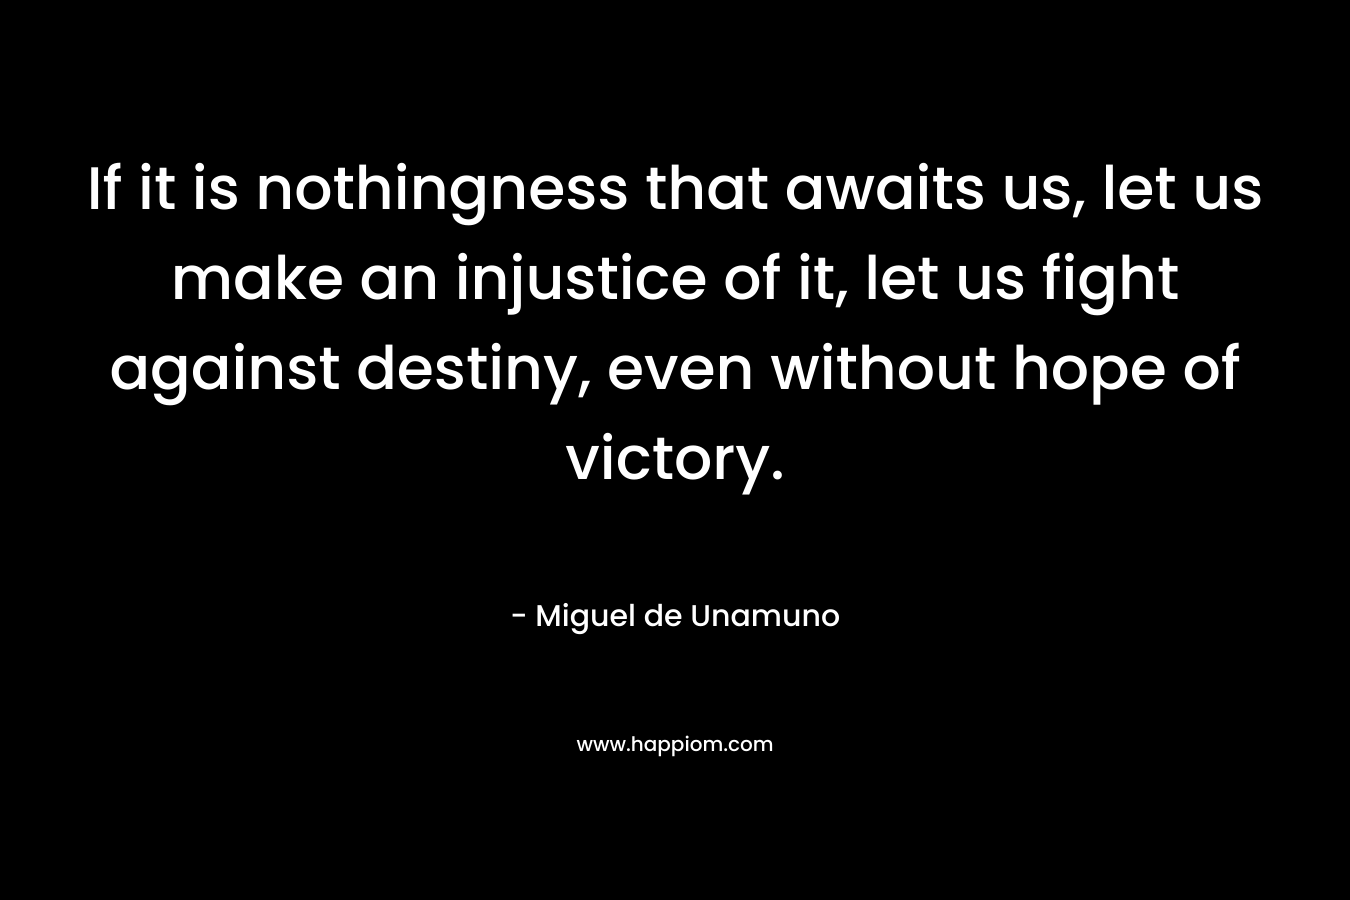 If it is nothingness that awaits us, let us make an injustice of it, let us fight against destiny, even without hope of victory.